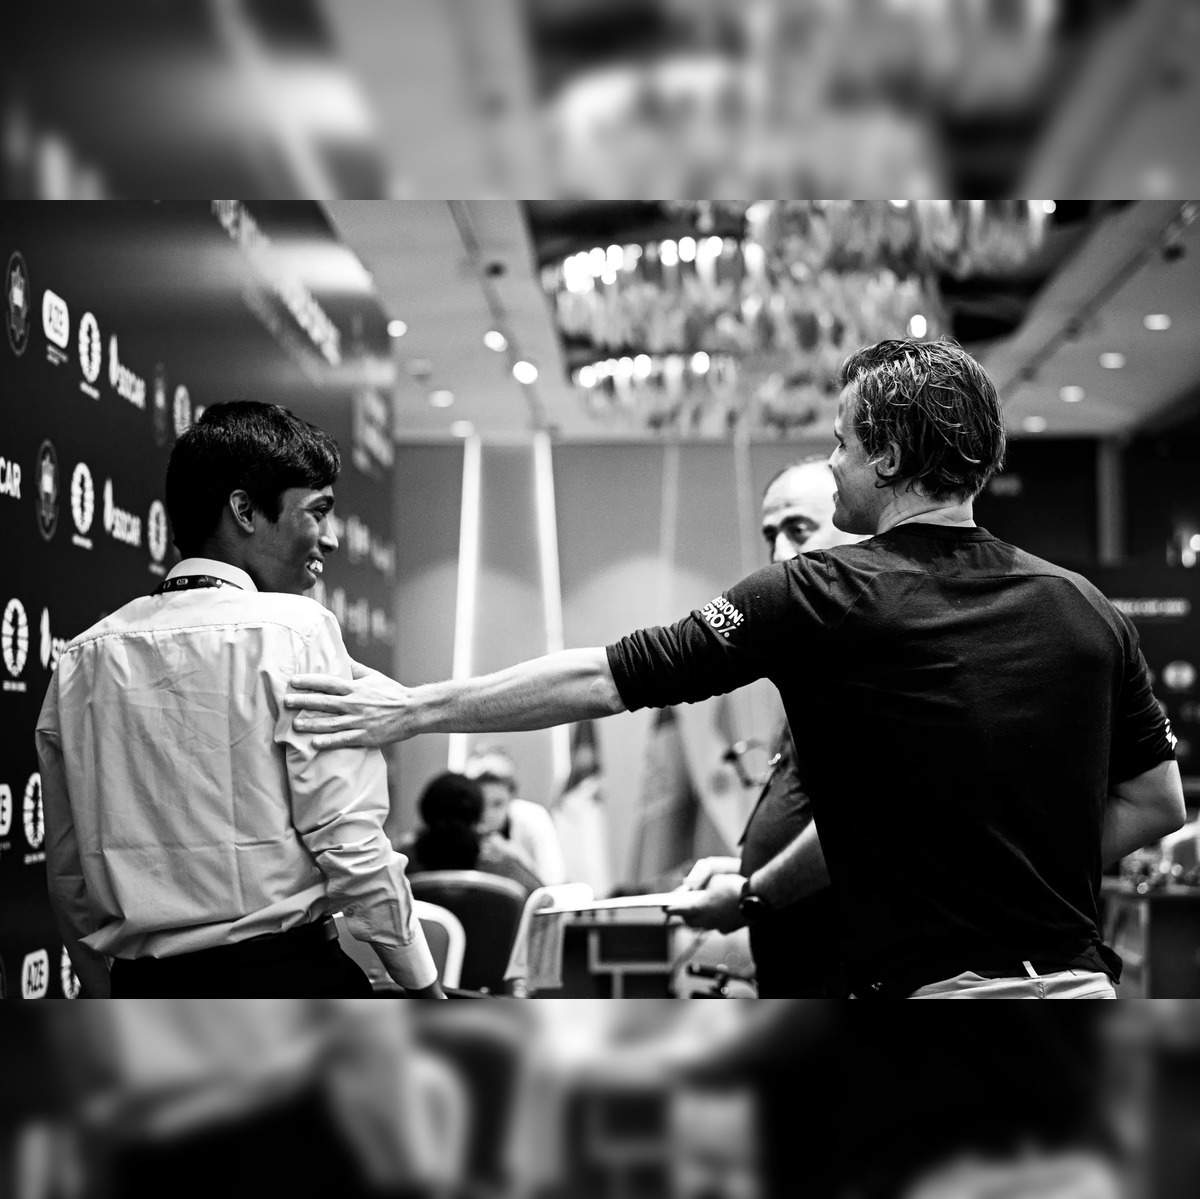 FIDE World Cup Final, 1: A normal day